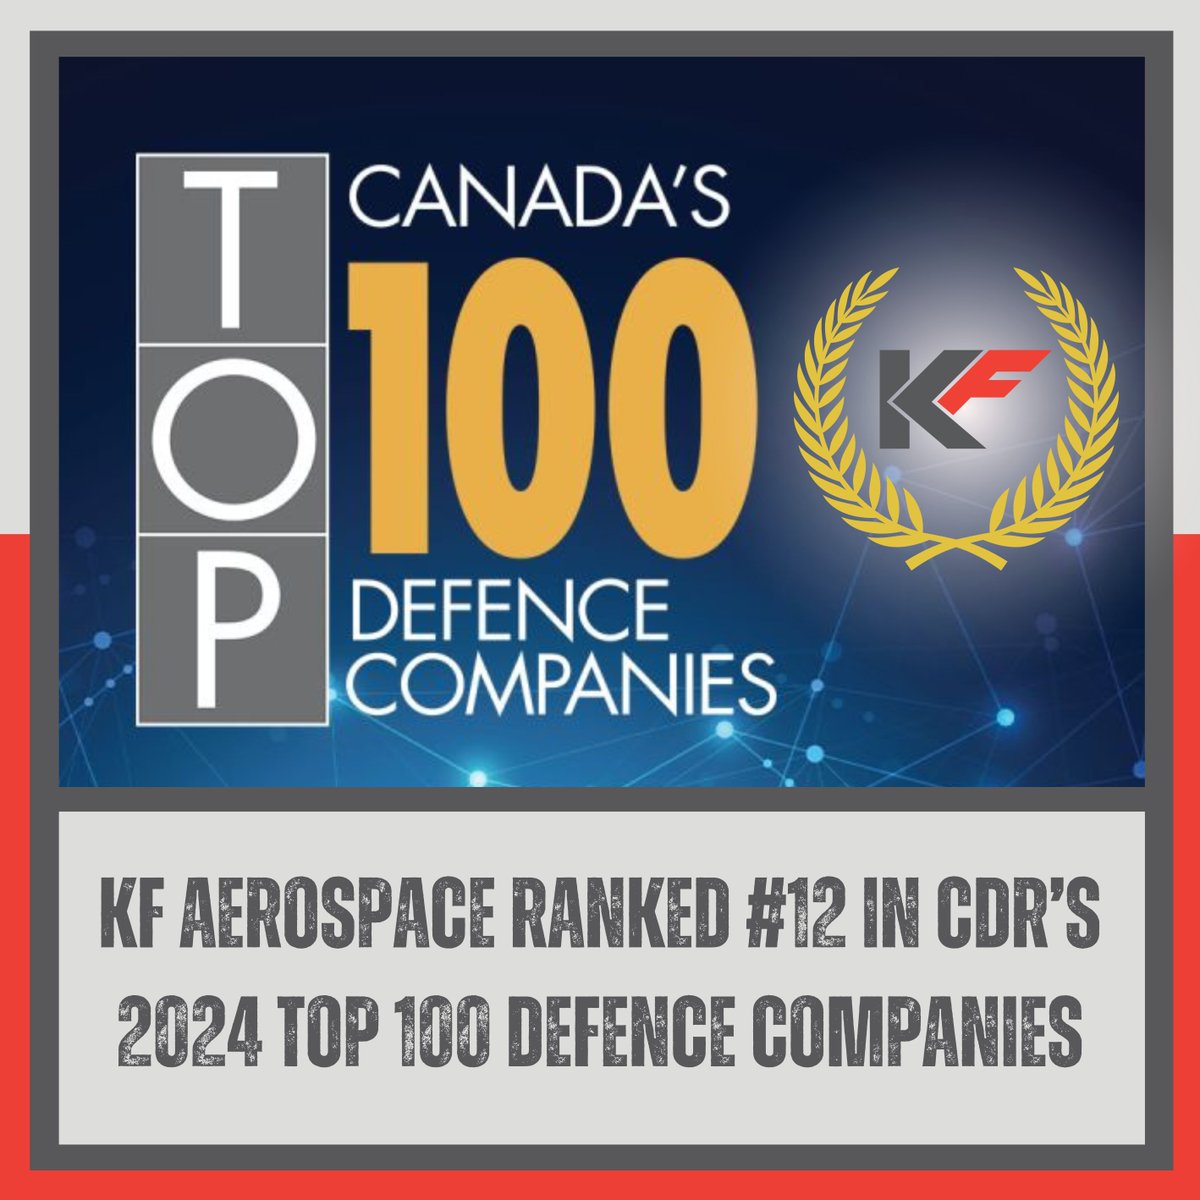 We're honoured to be named #12 on CDR’s Top 100 Defence Companies list for 2024! Congratulations to our dedicated team of experts who strive for excellence in supporting Canada’s brave armed servicemembers.